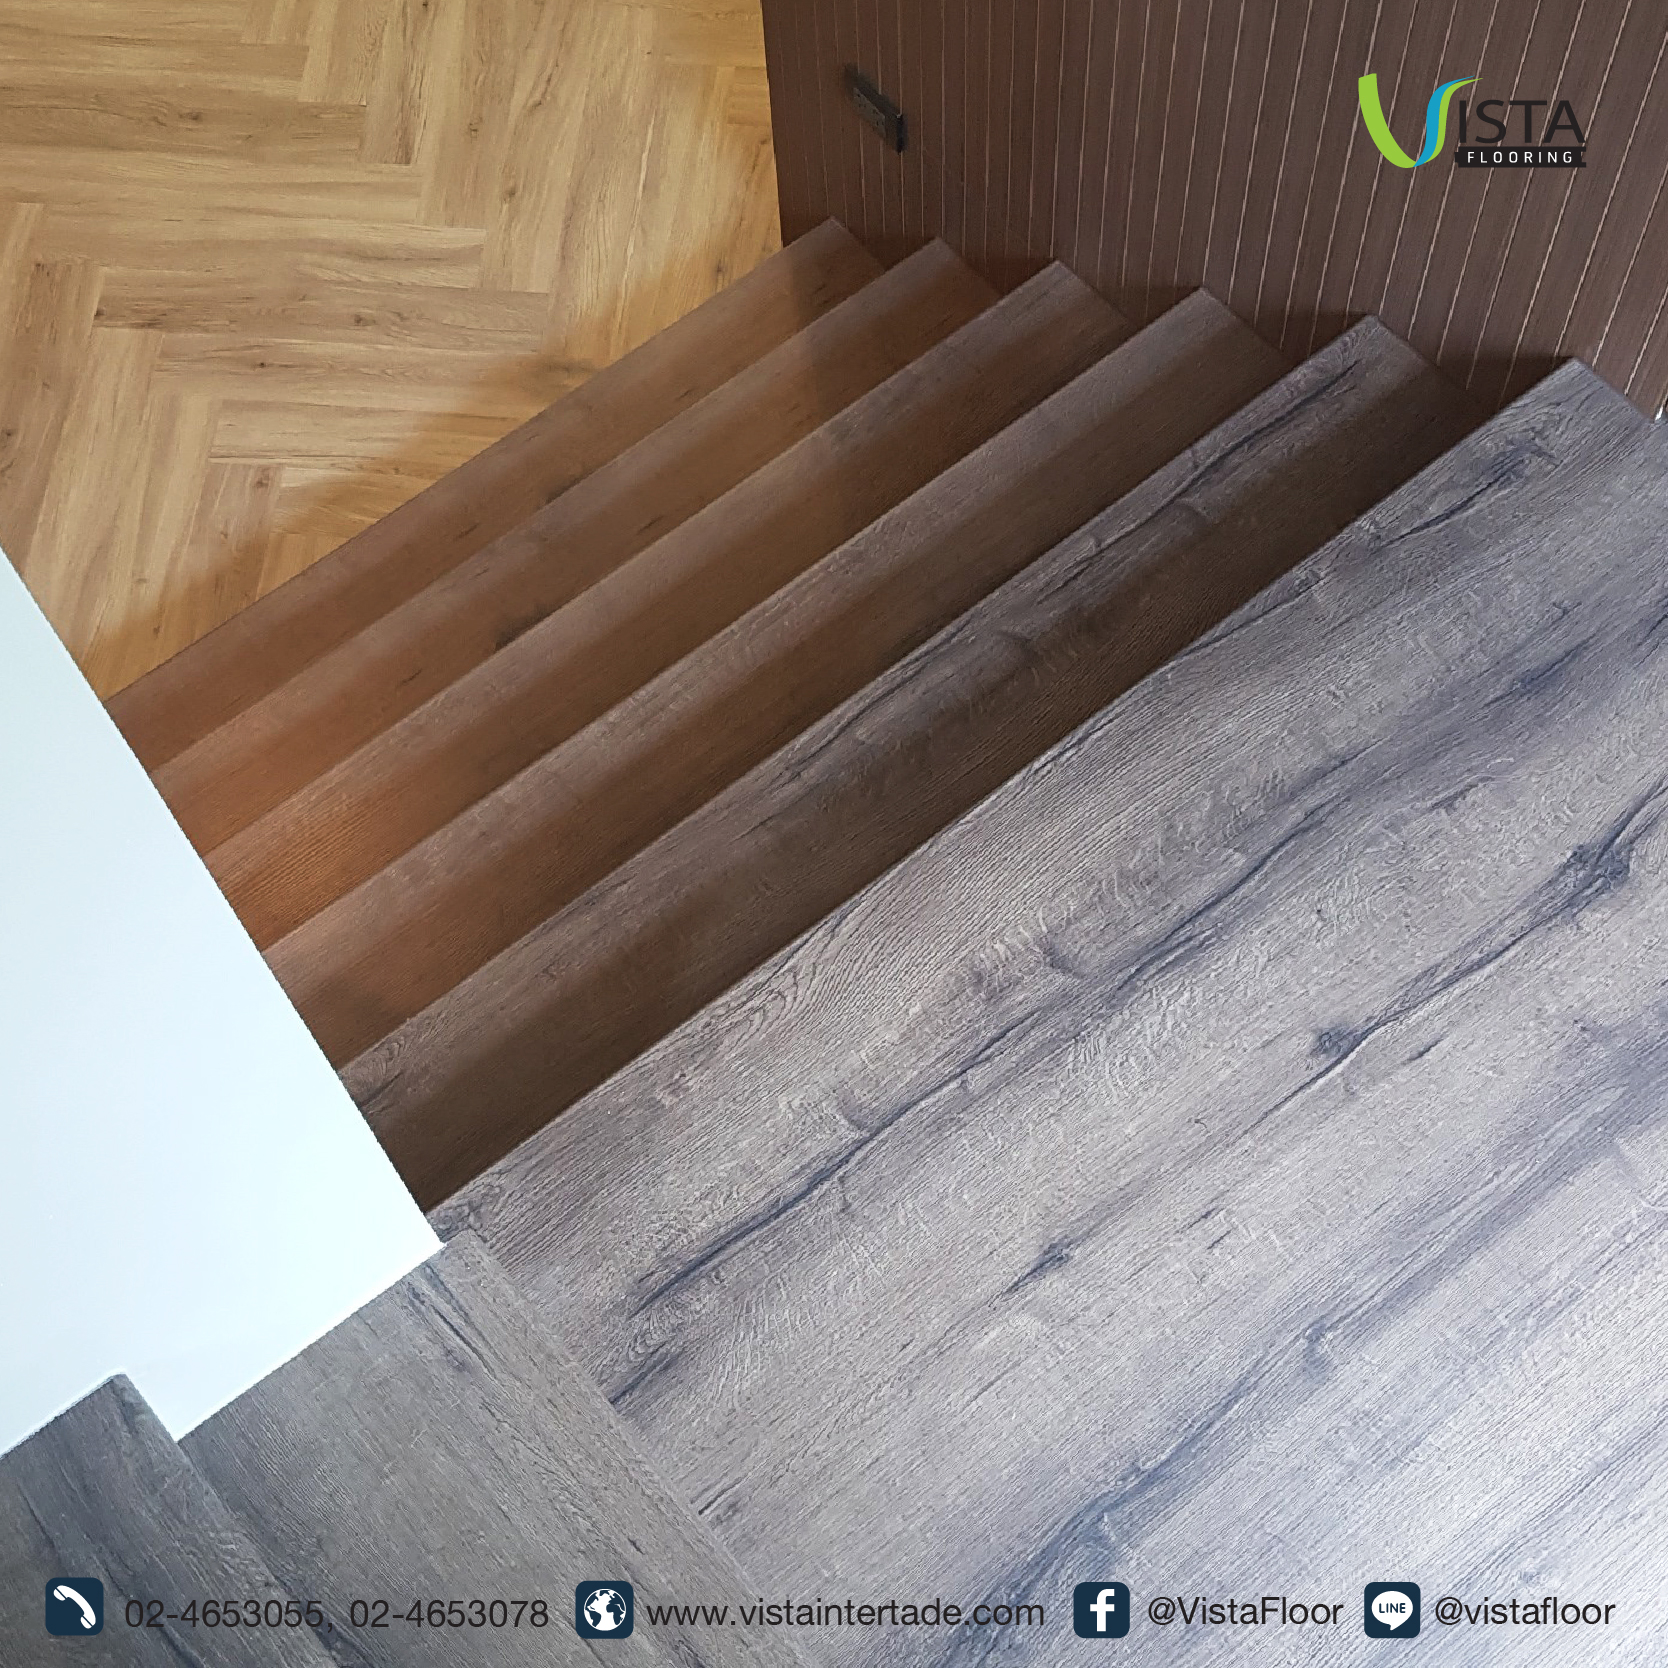 "Hybrid Functional Stairs" by Vista